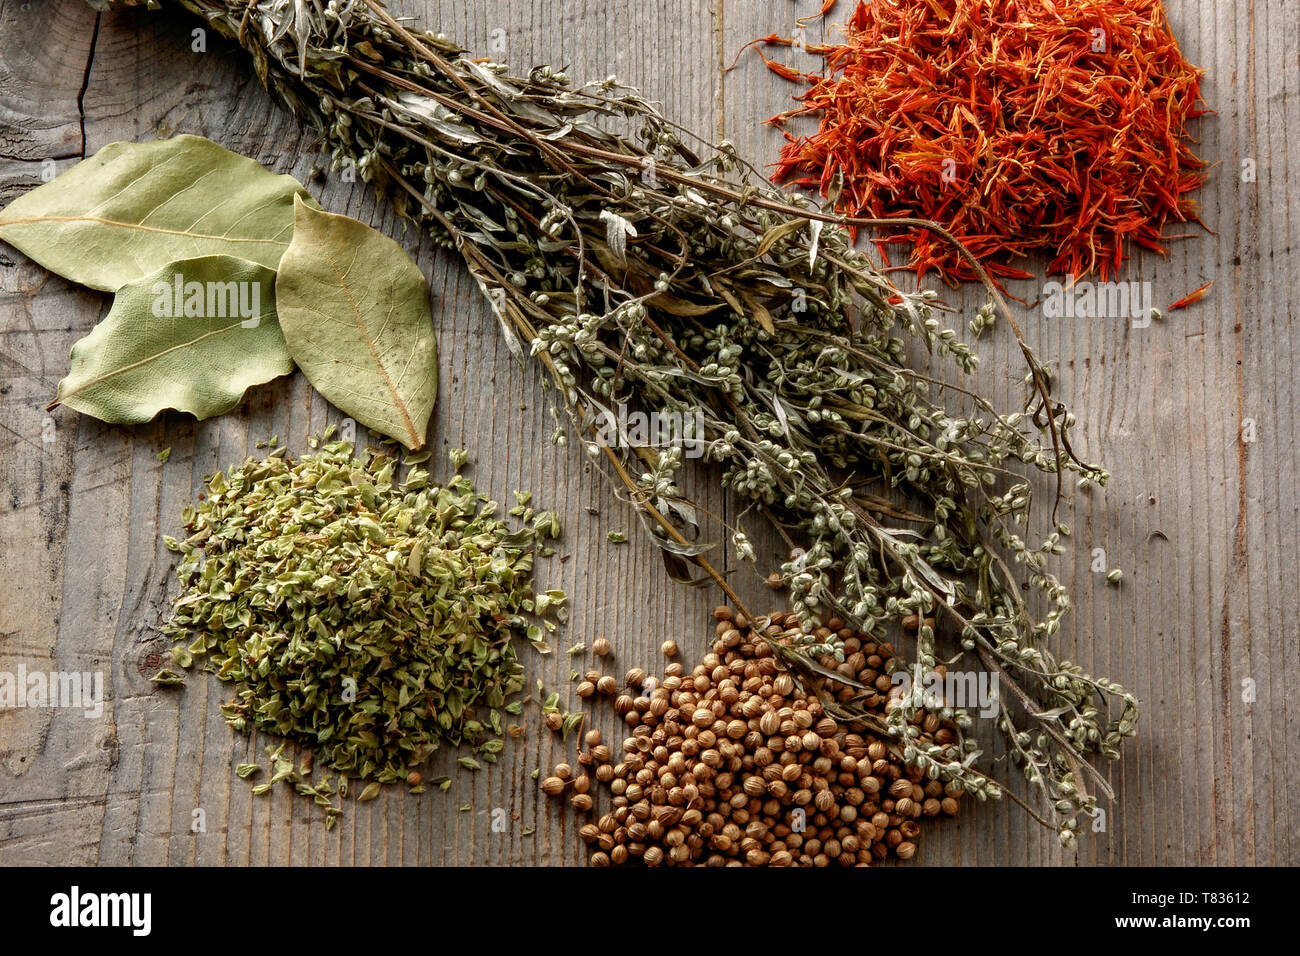 Mugwort, bay leaves, oregano, coriander and safflower on rustic wooden background Stock Photo